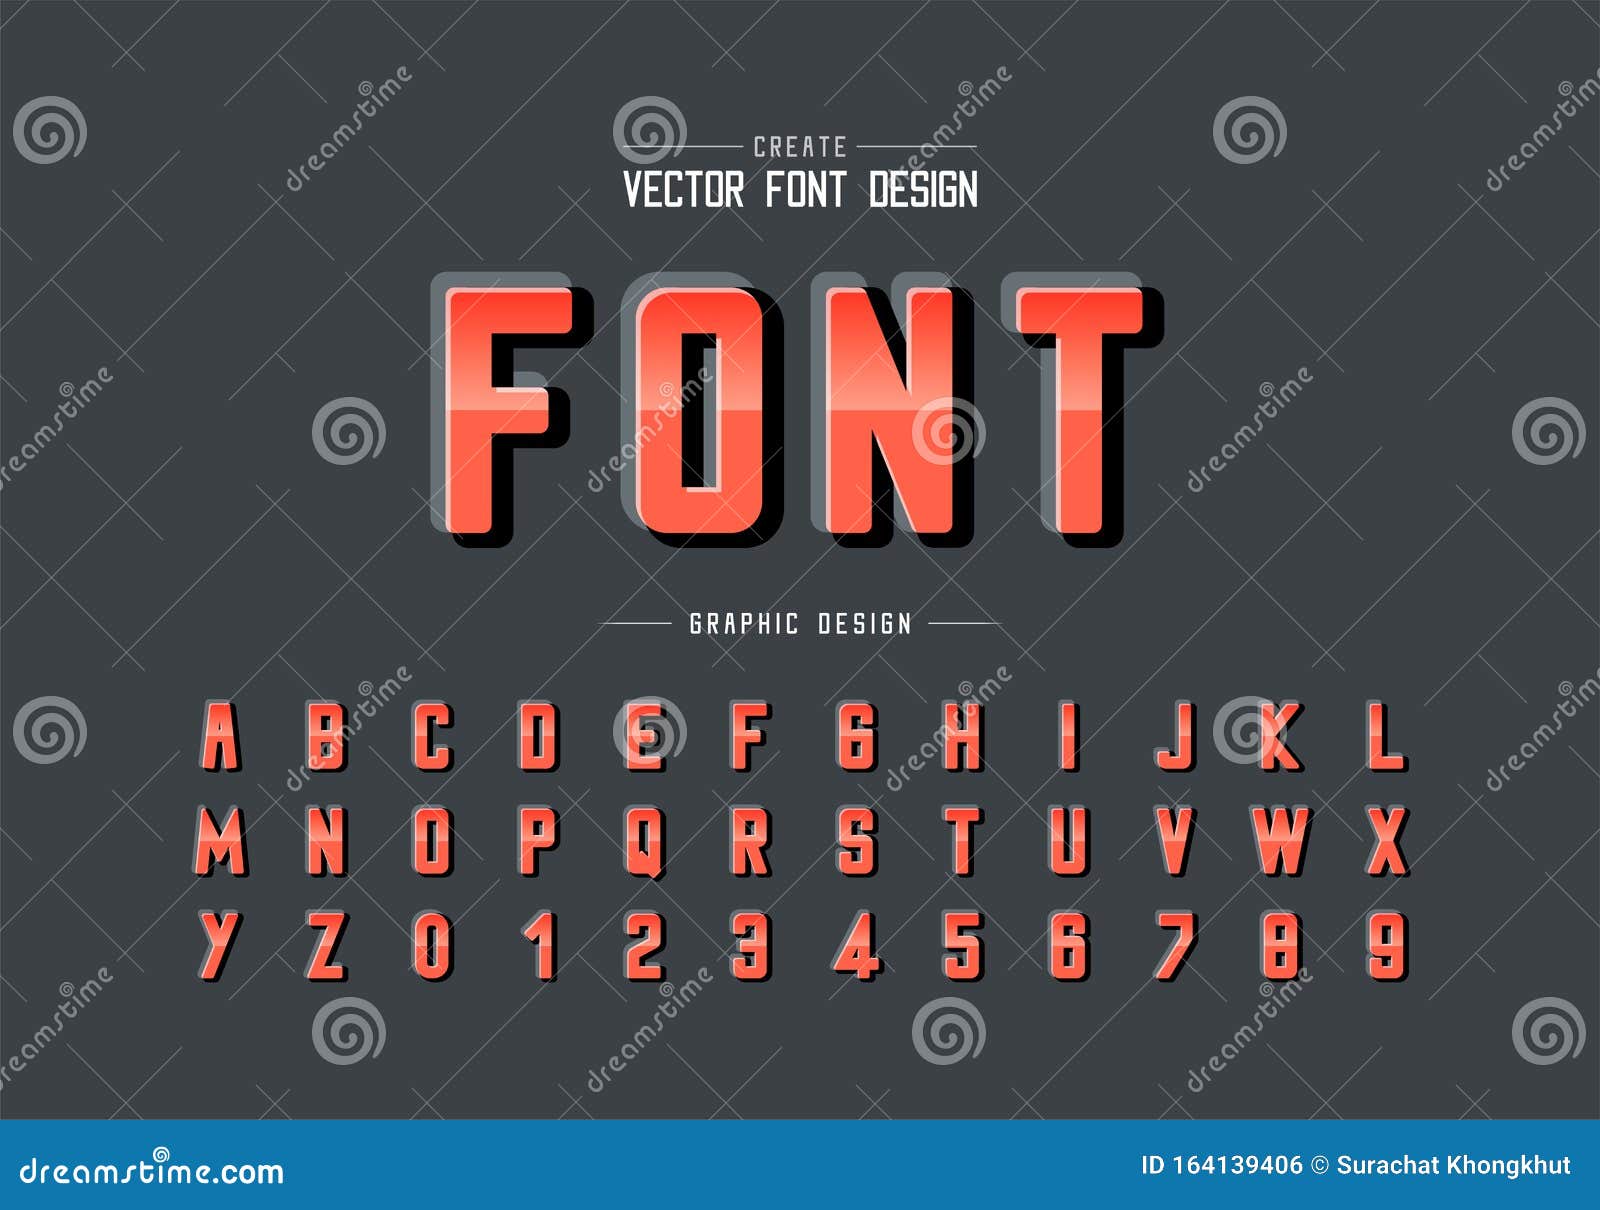 Gradient Font And Reflective Alphabet Vector, Round Typeface And Letter ...